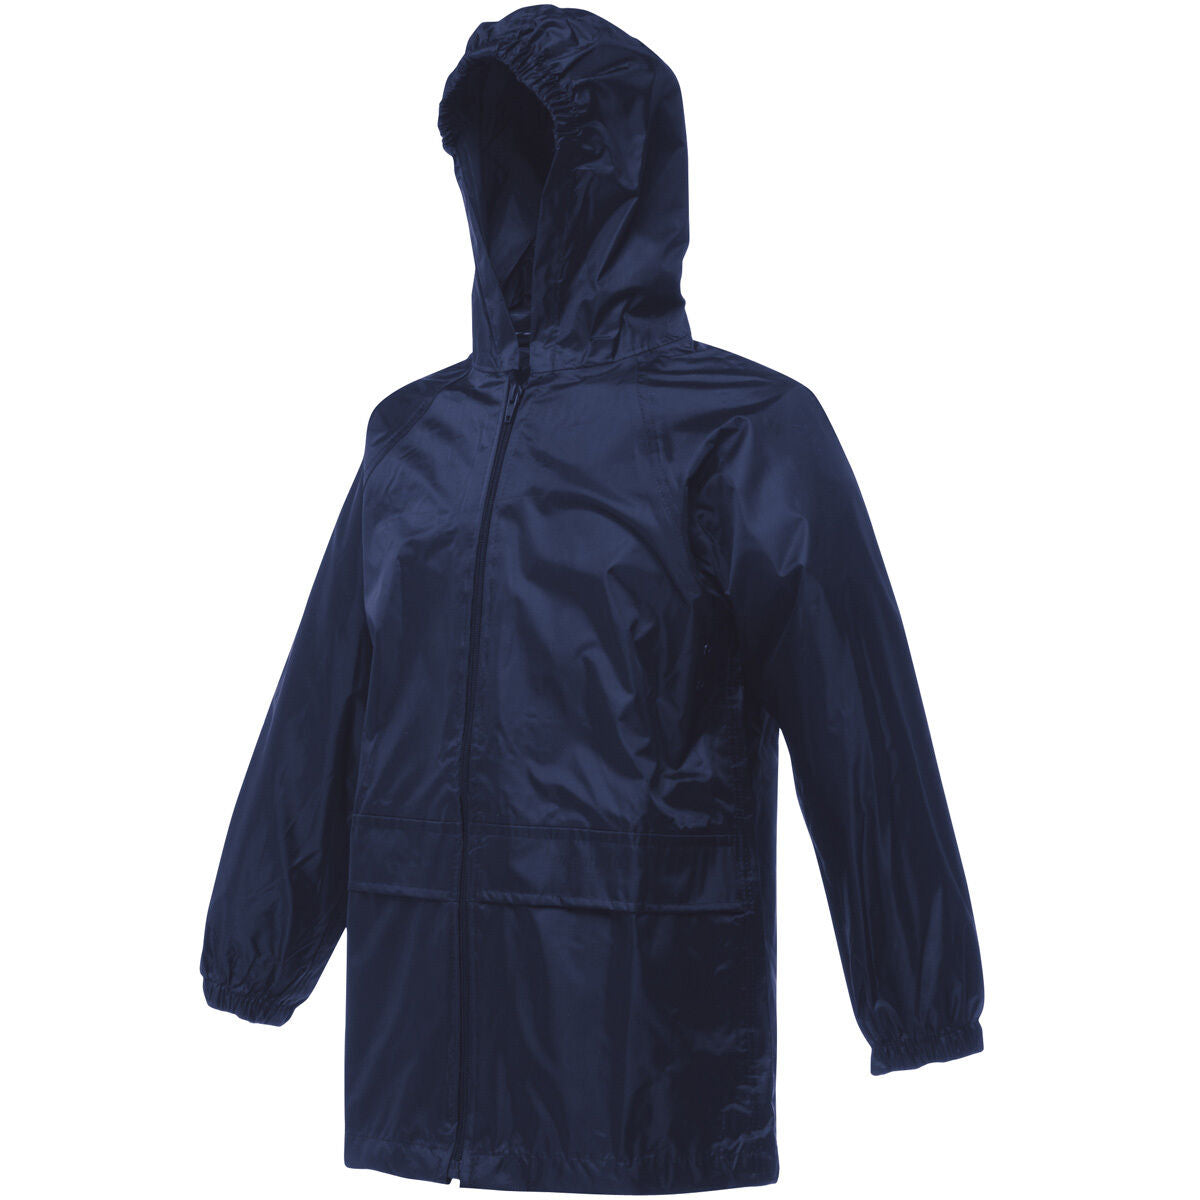 Regatta Adults 2 Piece Waterproof Rain Suit and Trousers - Premium clothing from Regatta - Just $24.99! Shop now at Warwickshire Clothing